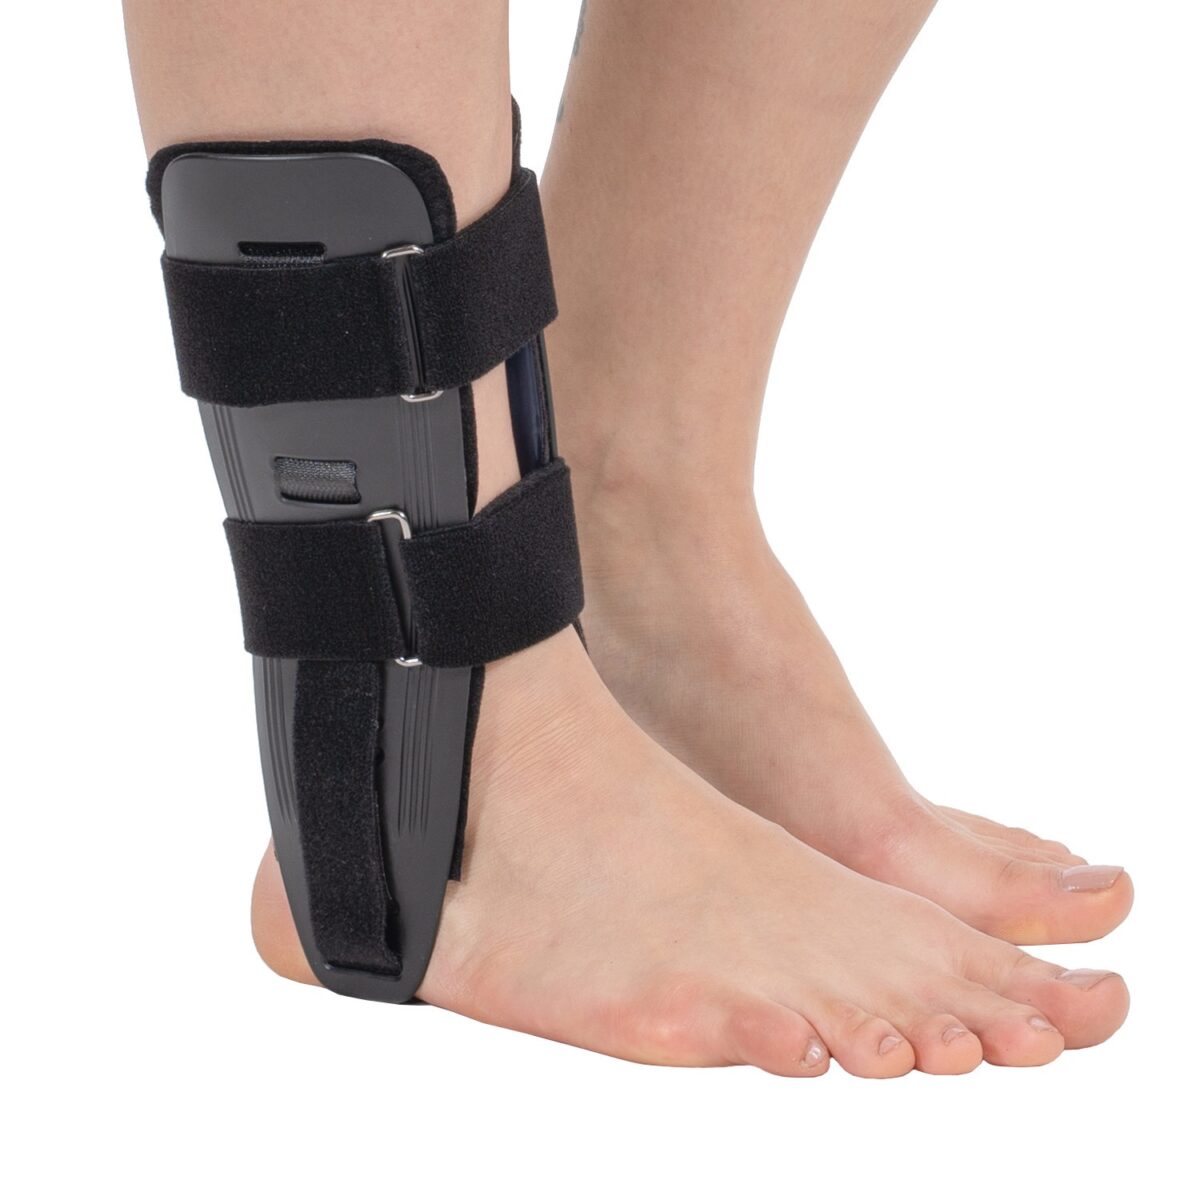 wingmed orthopedic equipments W616 ankle brace with gel pad 32 1 1